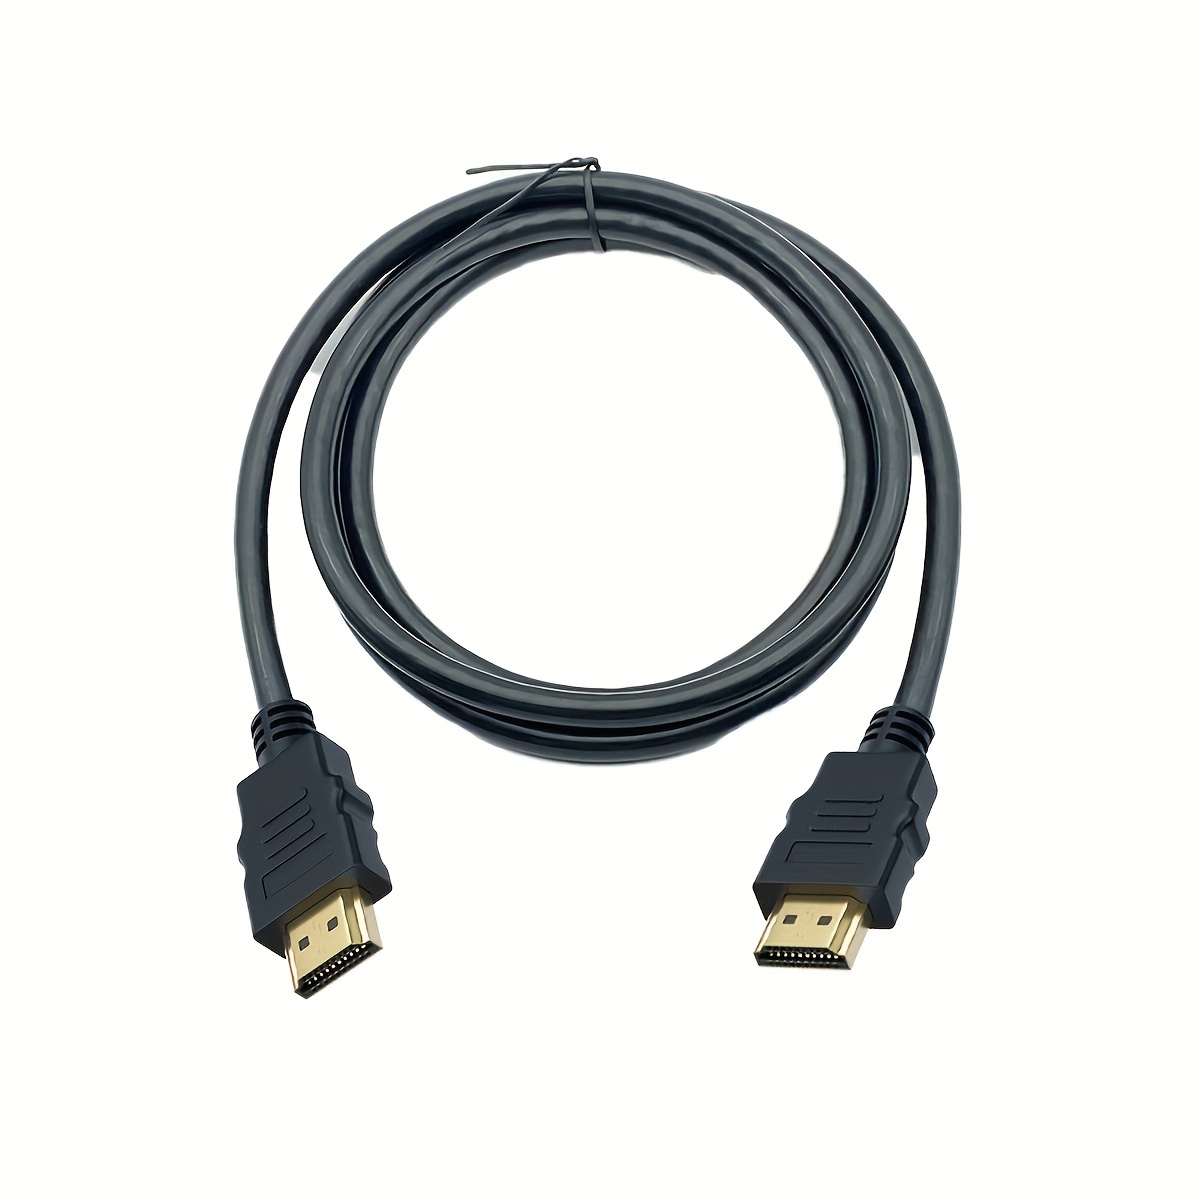  Master Cables Black HDMI Cable for Sony Playstation 4 Consoles  - 2m - High-Speed, Gold Plated, Premium Quality : Video Games